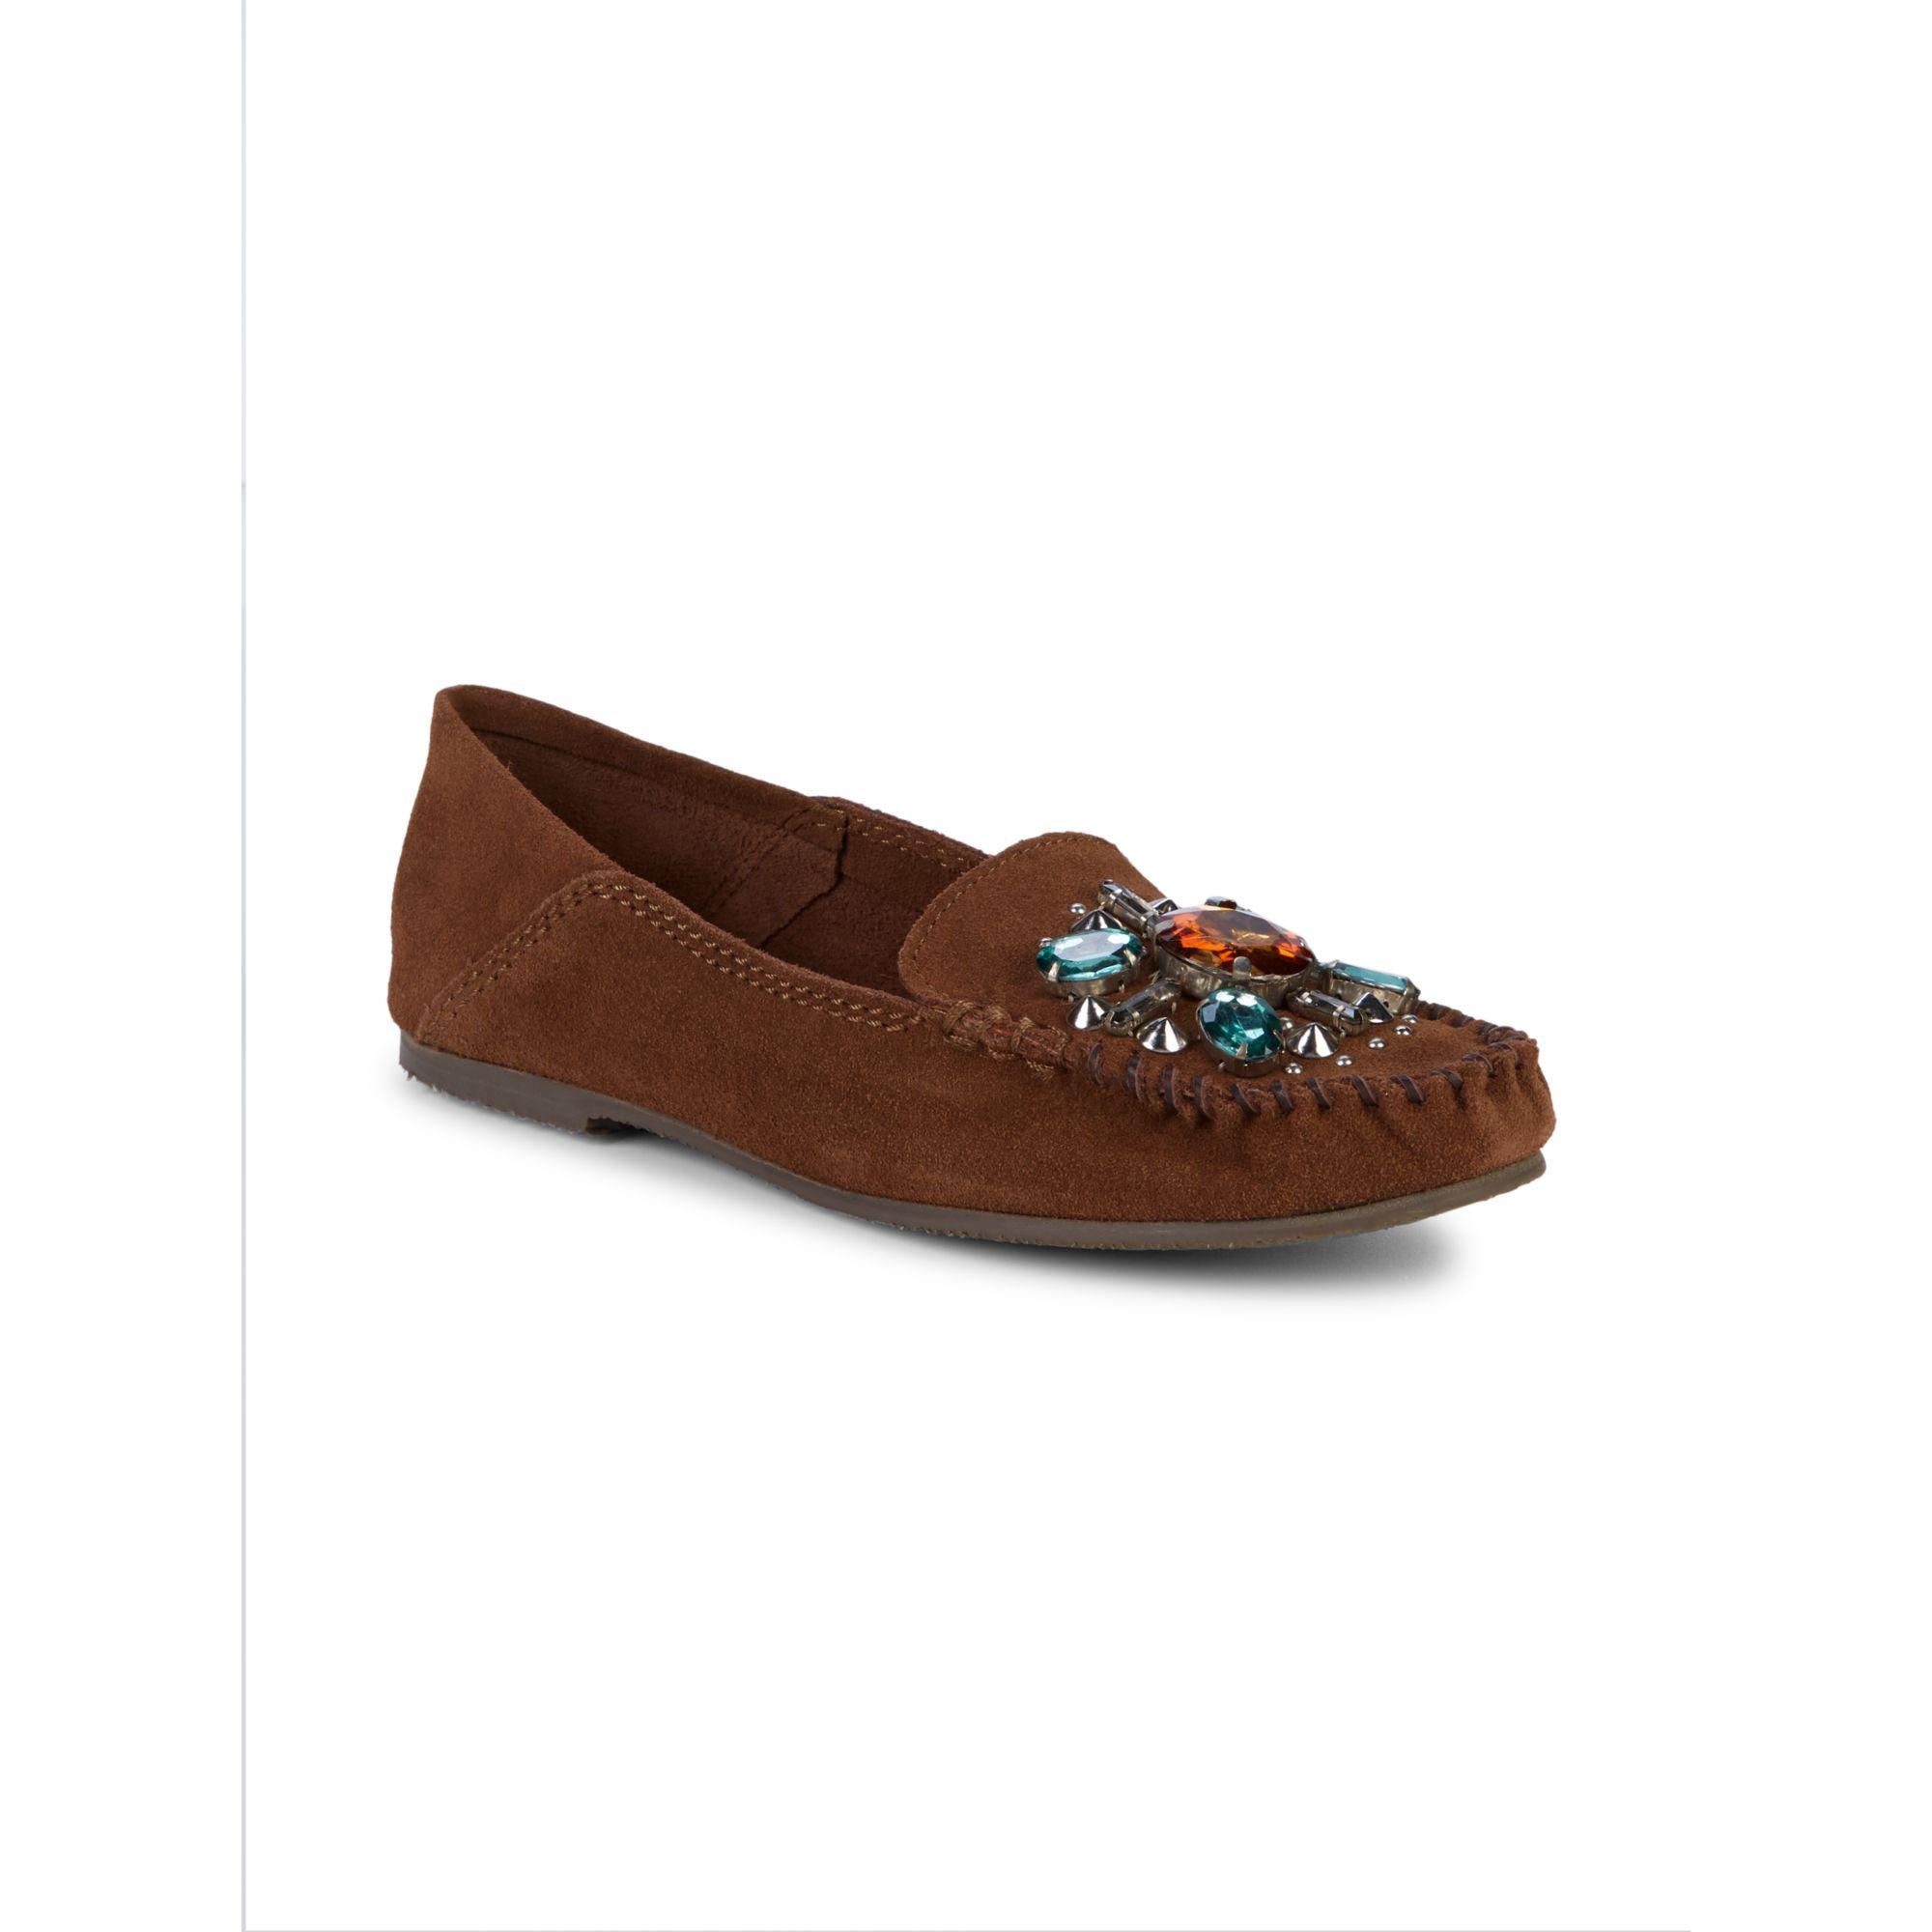 Free People Embellished Suede Loafers in Brown - Lyst